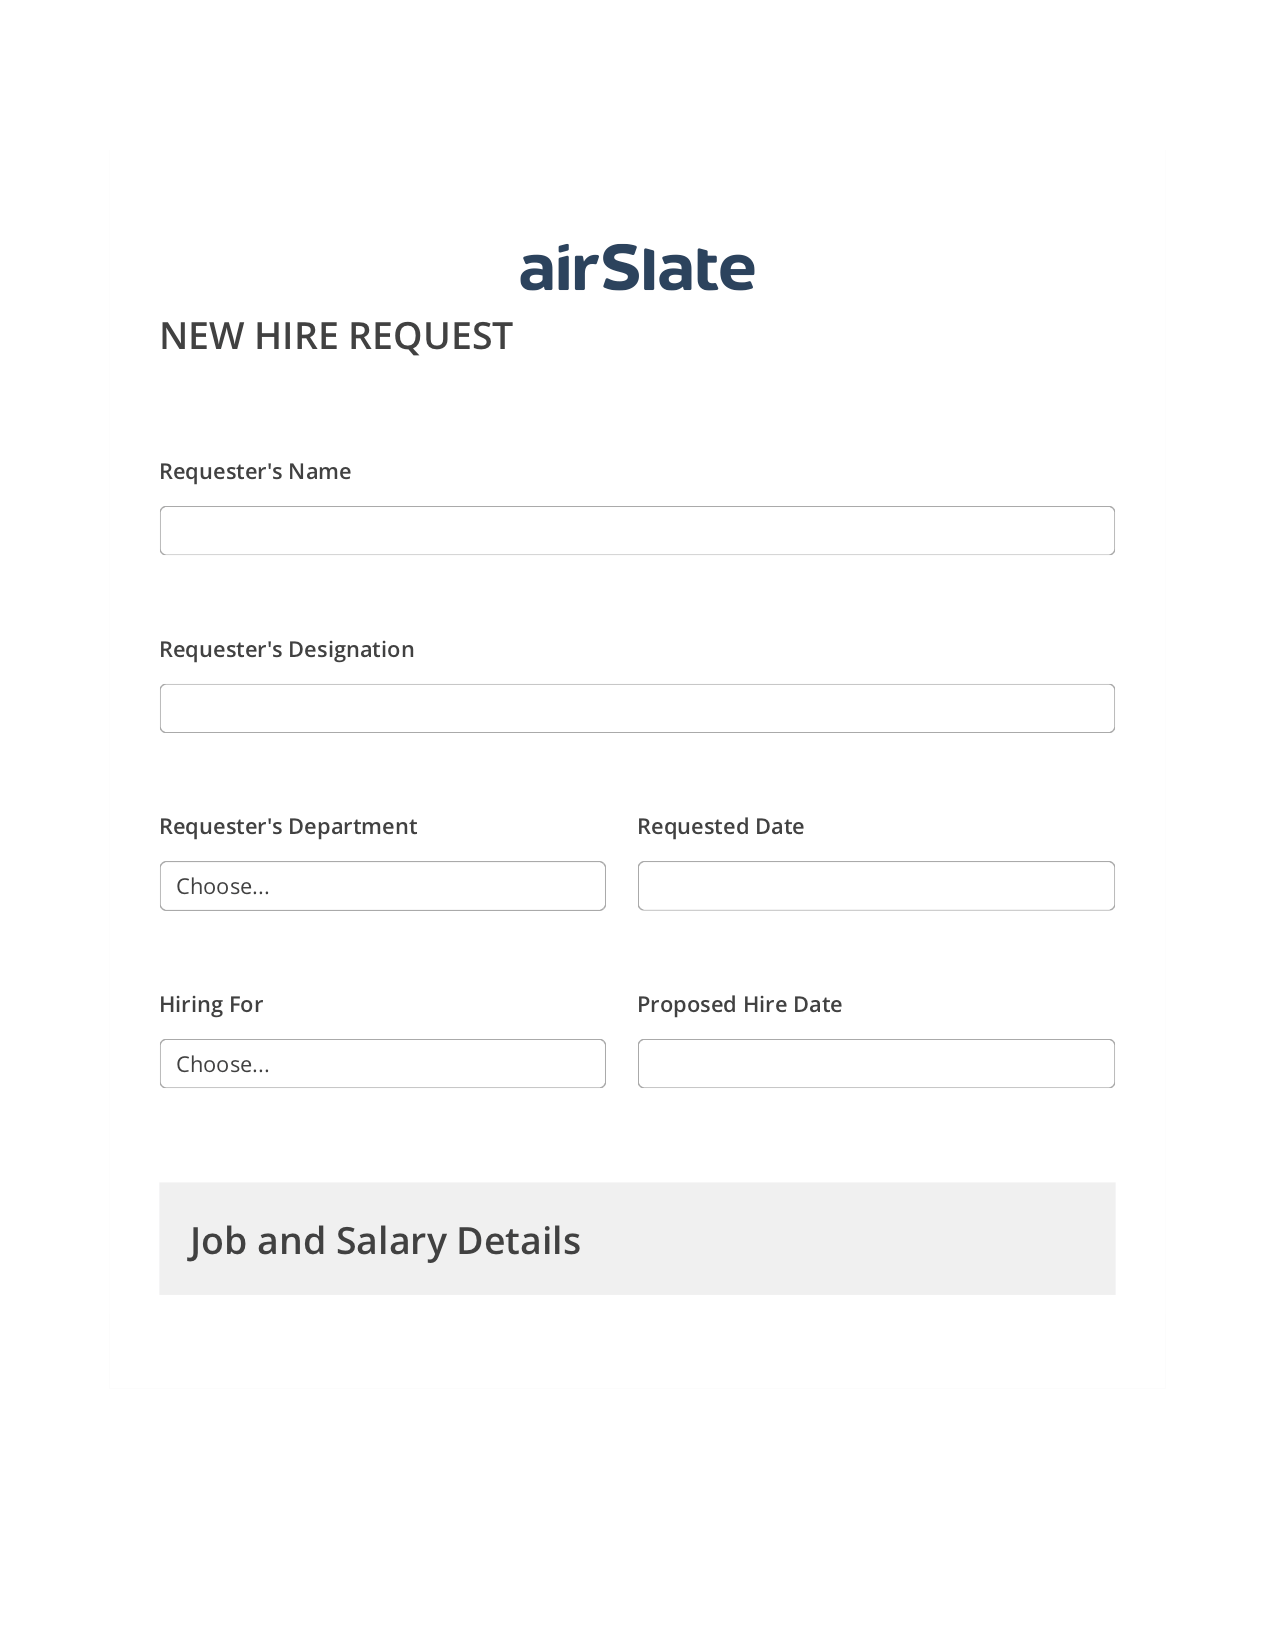 Hiring Request Workflow Pre-fill from Salesforce Records Bot, Set signature type addon, Export to Excel 365 Bot